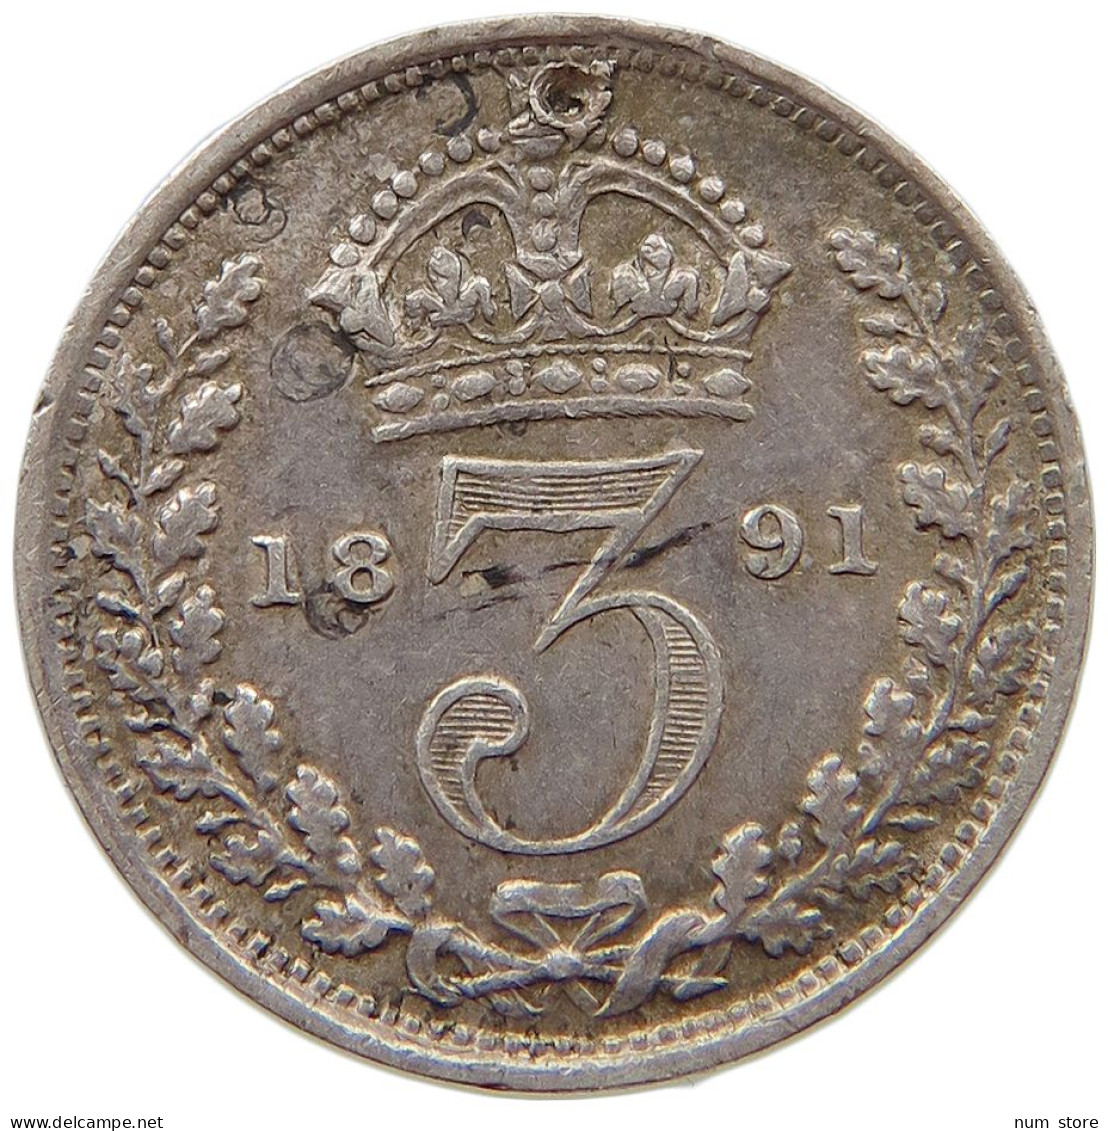 GREAT BRITAIN THREEPENCE 1891 Victoria 1837-1901 #t078 0349 - F. 3 Pence